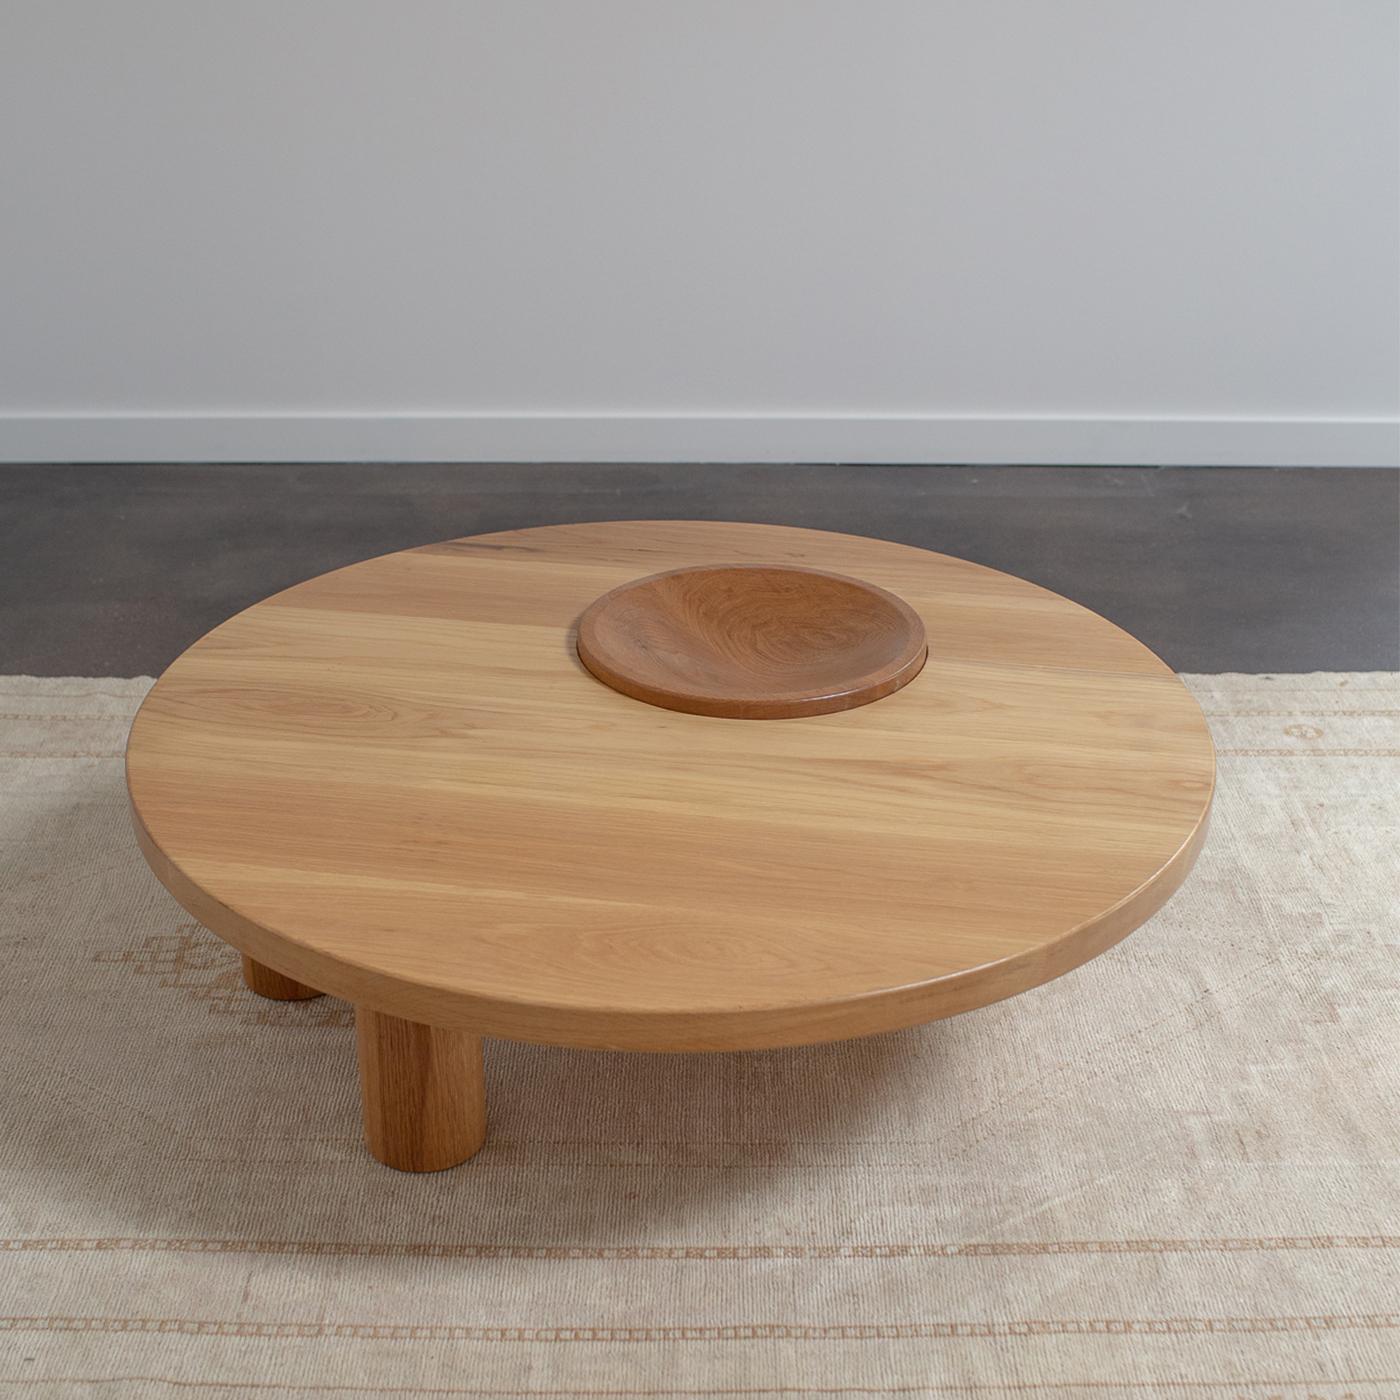 A three-legged solid oak round coffee table with built in bowl. The large leg is stationary with two smaller moveable legs.